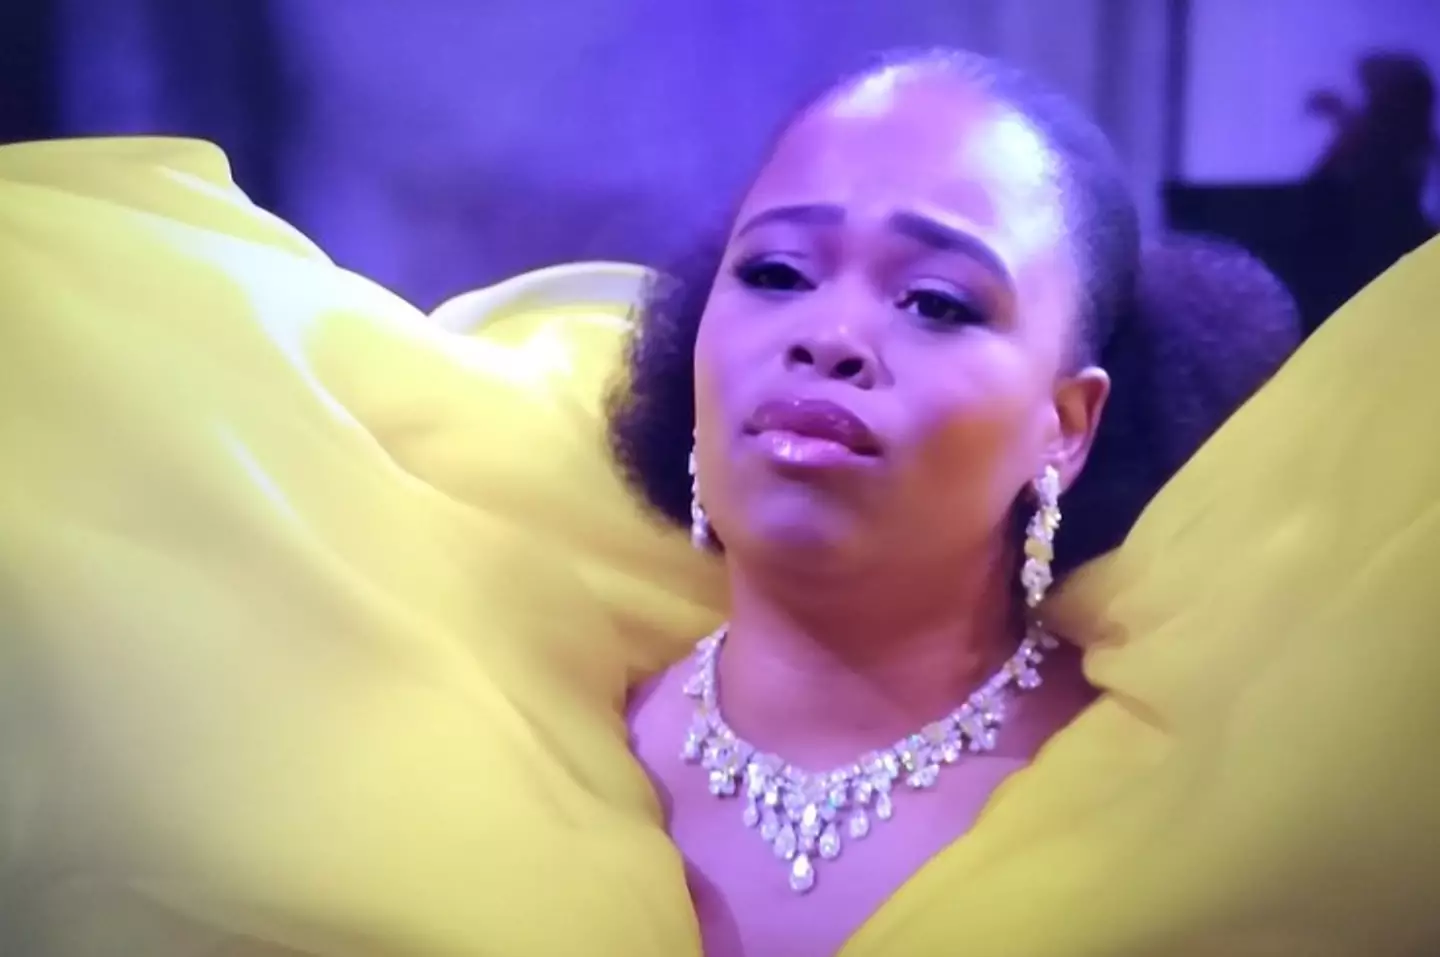 Not only were viewers stunned by Pretty Yende's vocals, but also by her outfit.